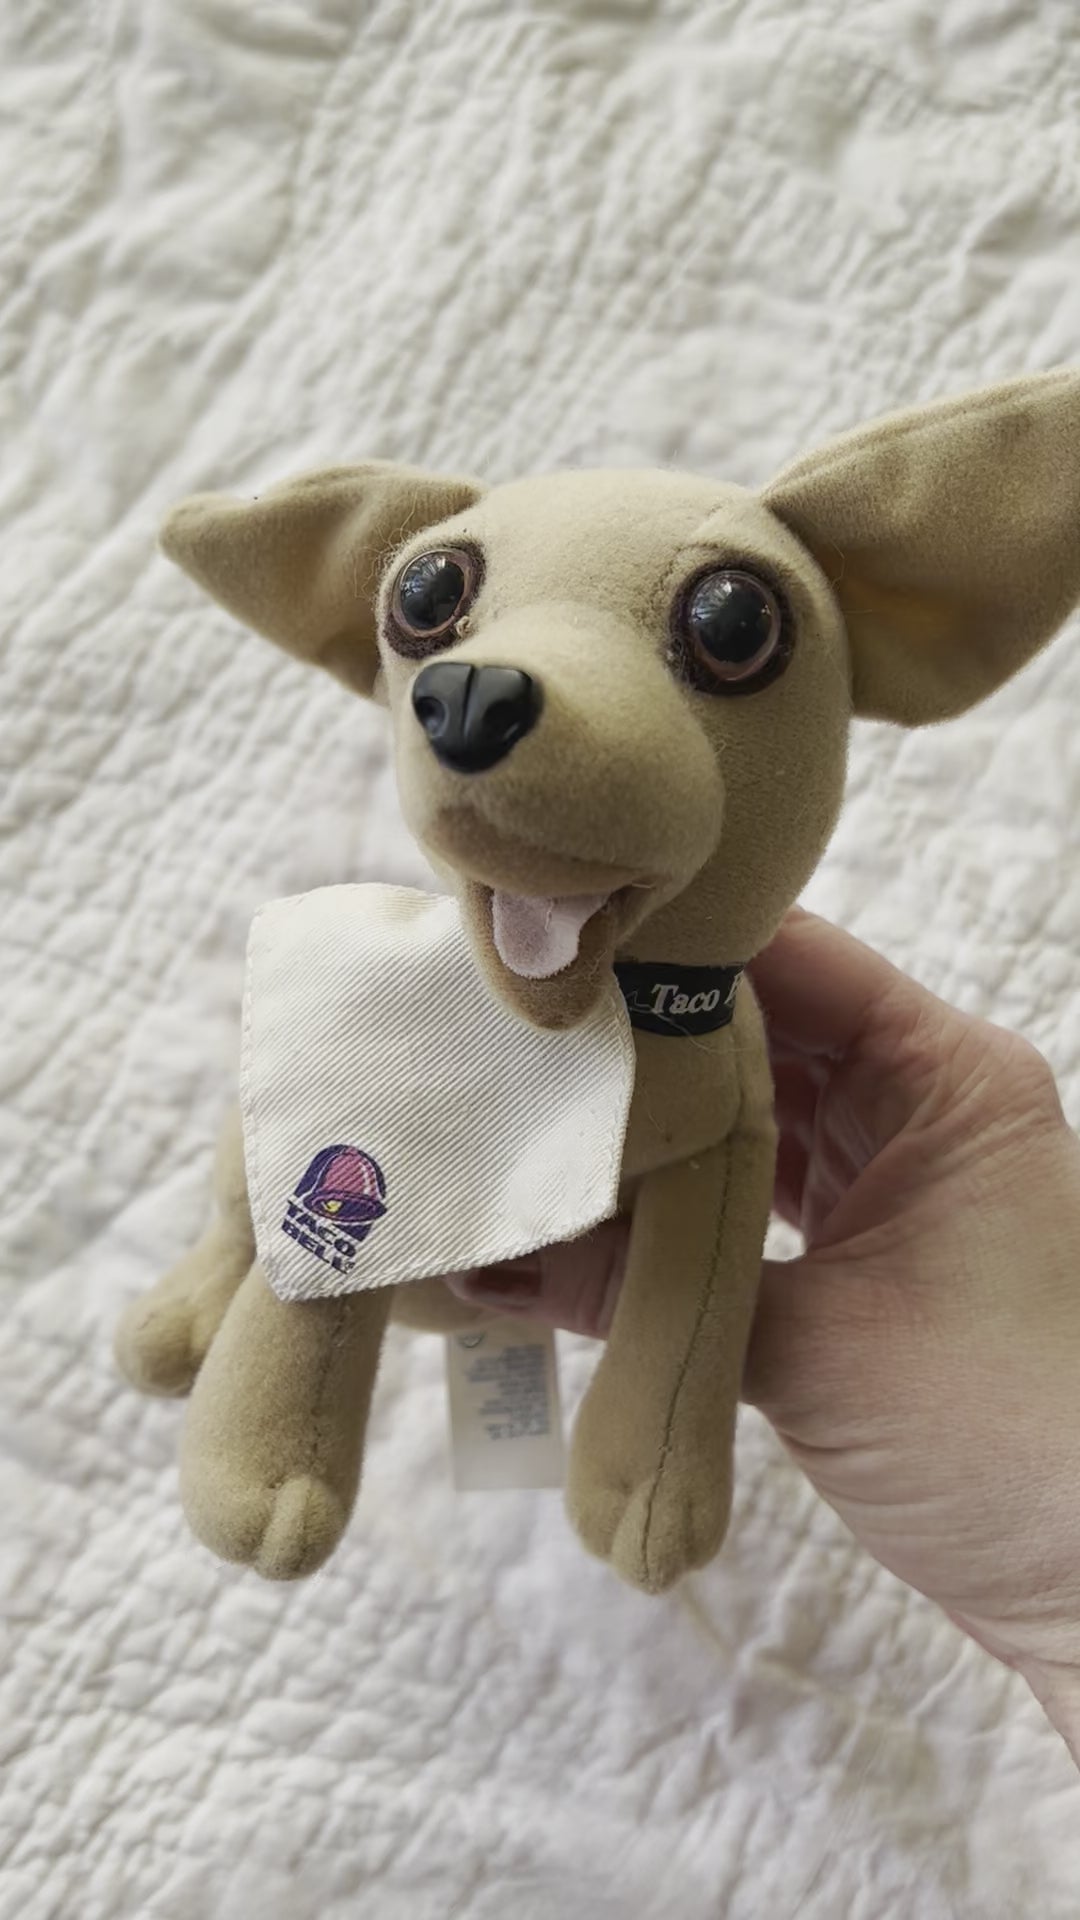 90s taco bell dog